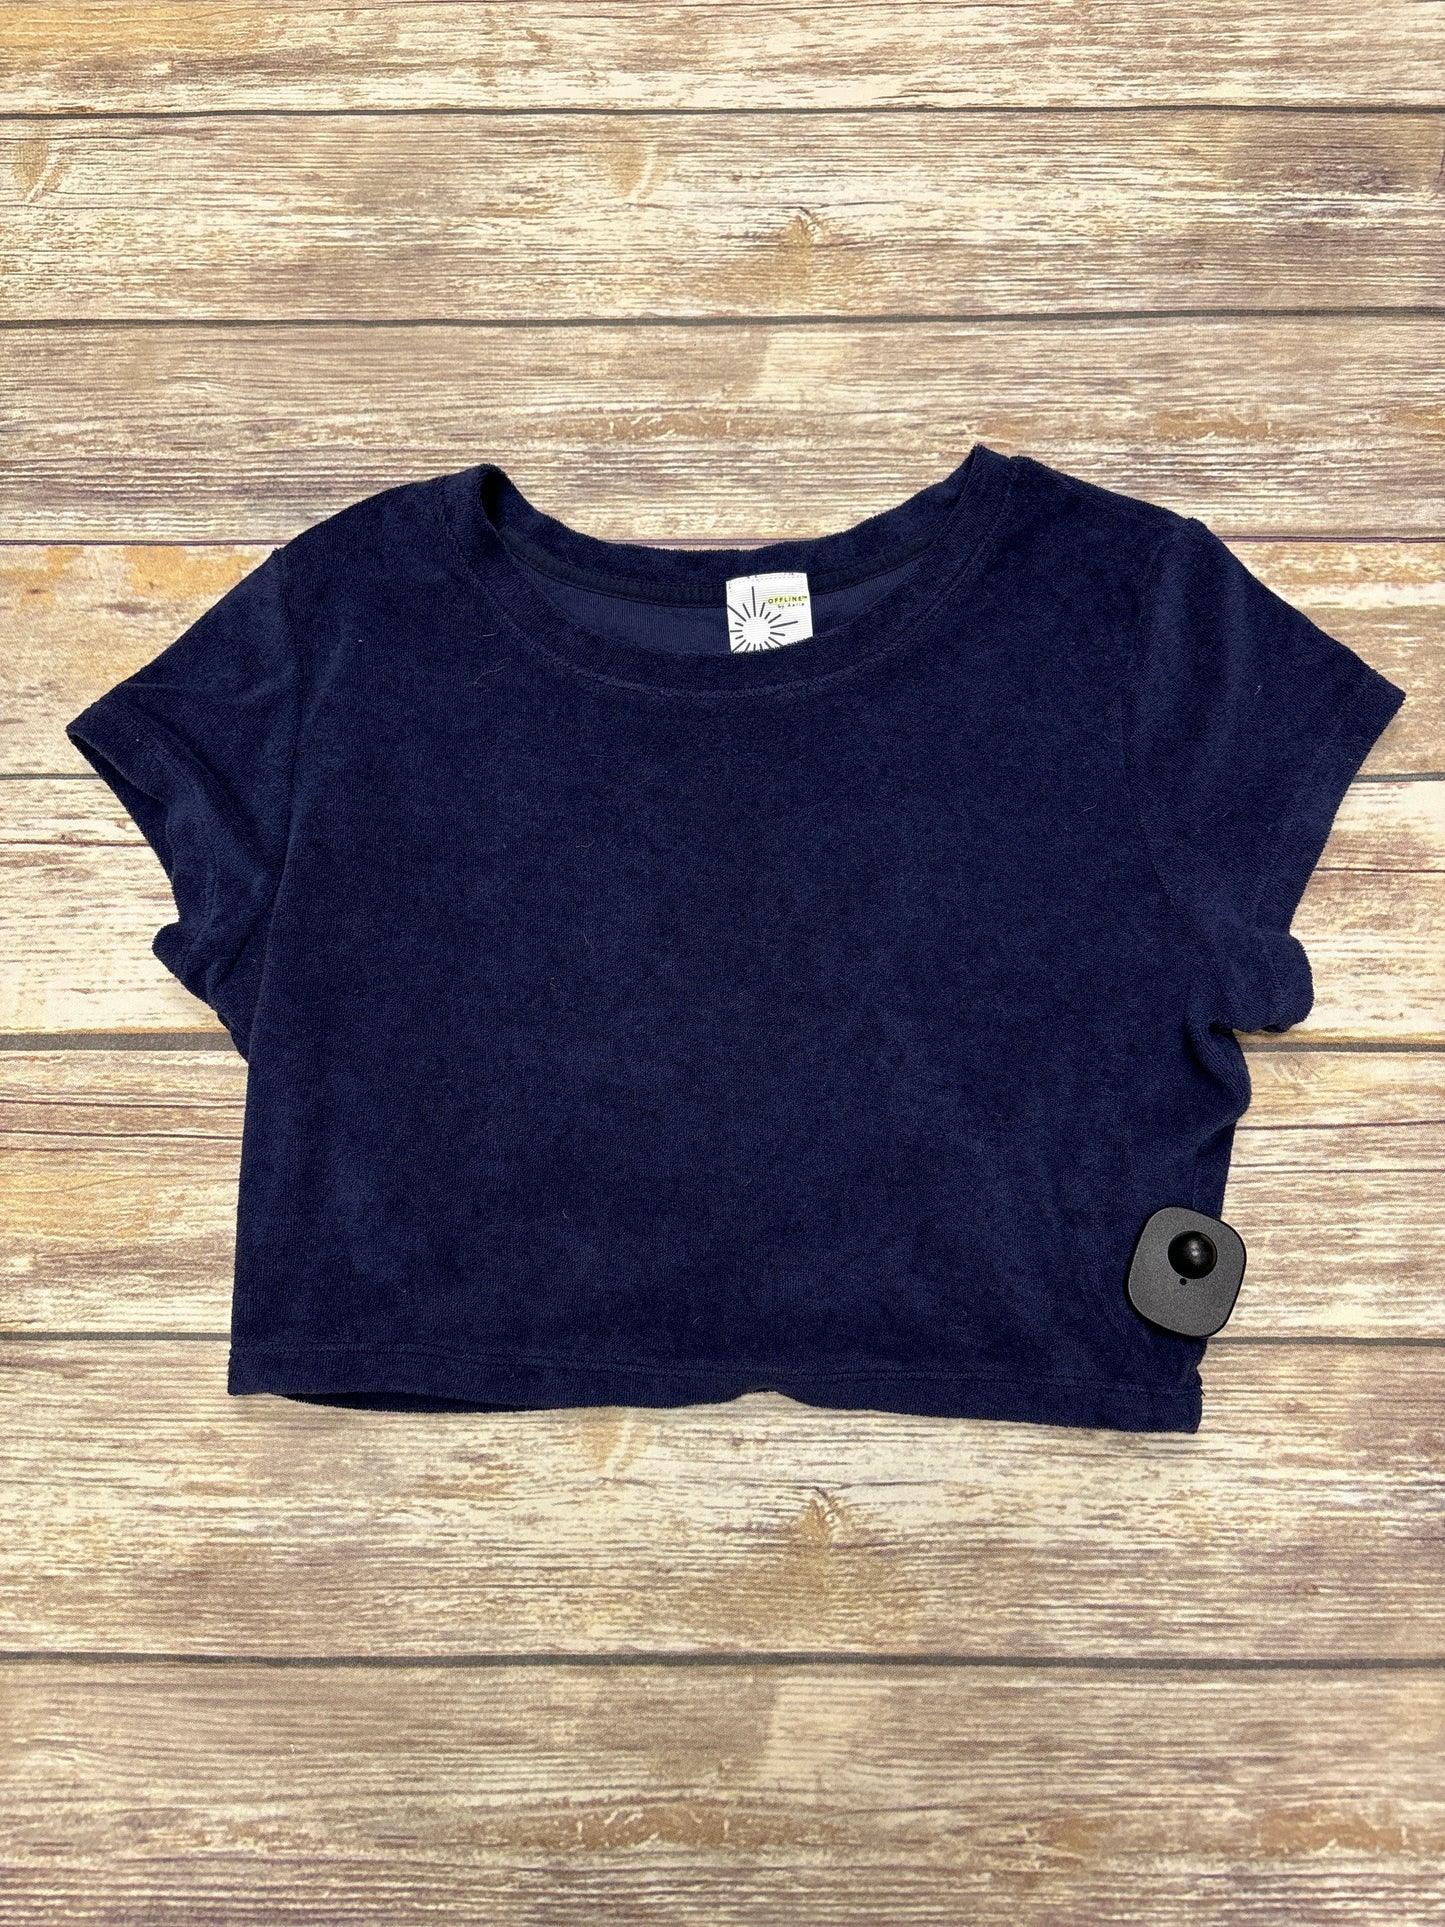 Navy Athletic Top Short Sleeve Aerie, Size M